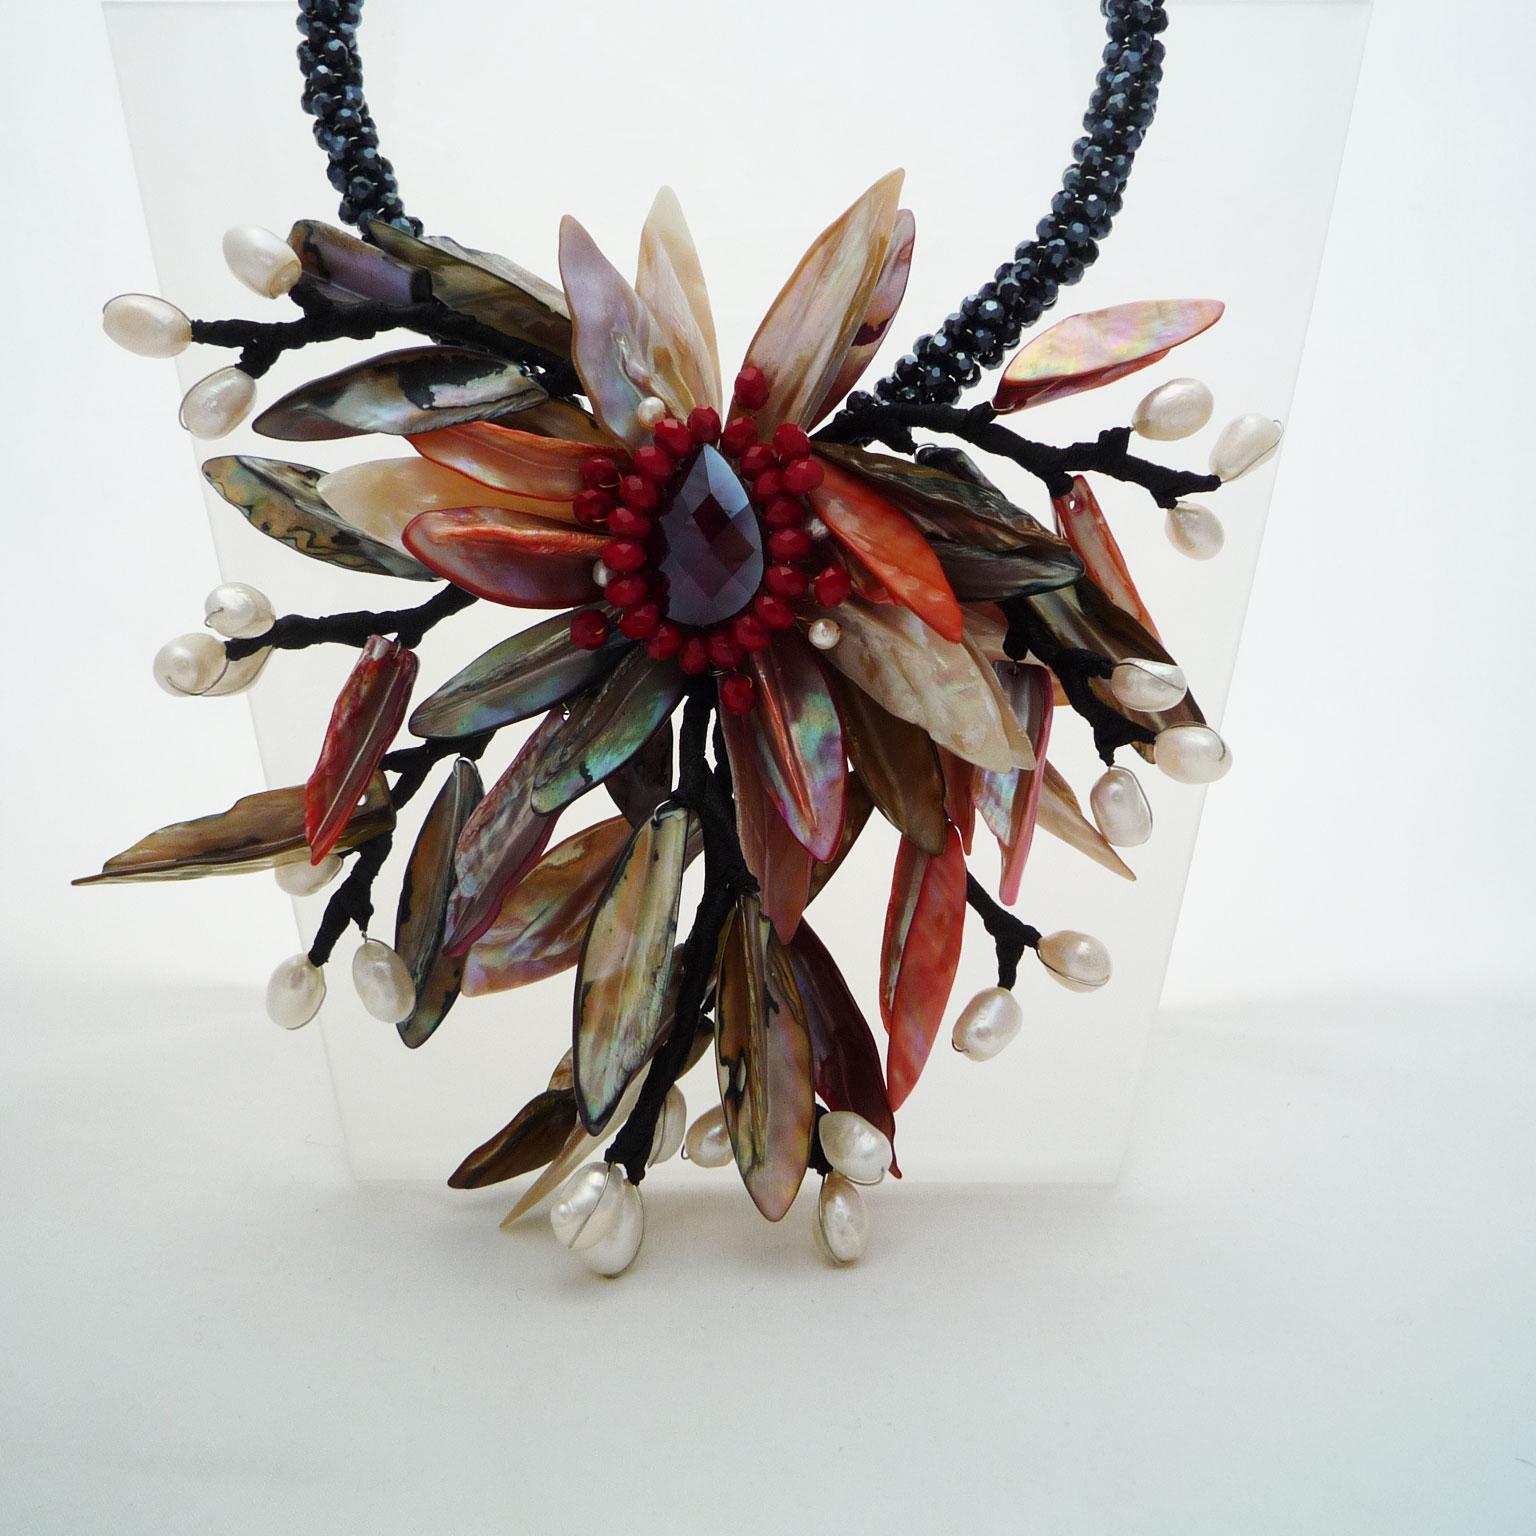 Statement necklace pearls, sea shells and Swarovski stones
Opulent necklace in the shape of a sea flower. 
The materials coming from the water are artfully combined, so that the impression of a flower from the sea is created.
Handcrafted, Modern